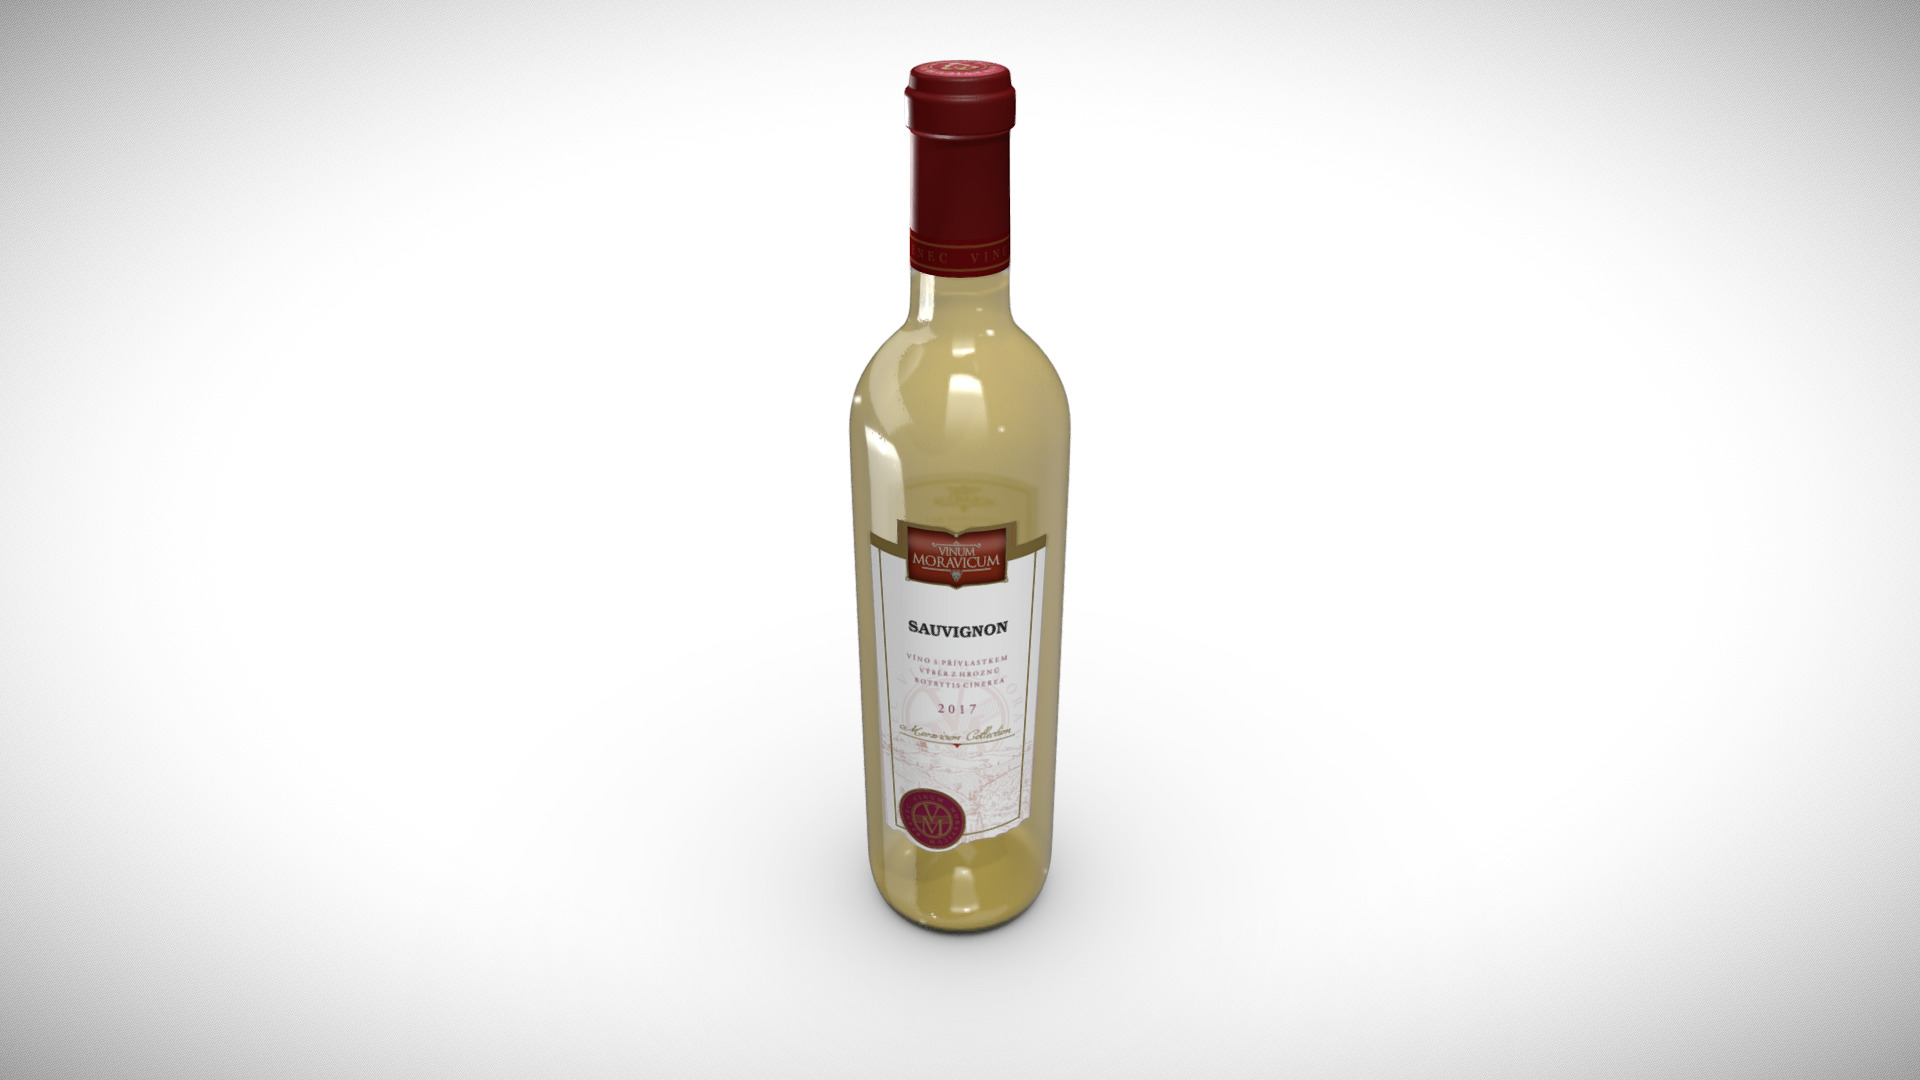 3D model Bottle of Wine Sauvignon 2017 - This is a 3D model of the Bottle of Wine Sauvignon 2017. The 3D model is about a bottle of alcohol.